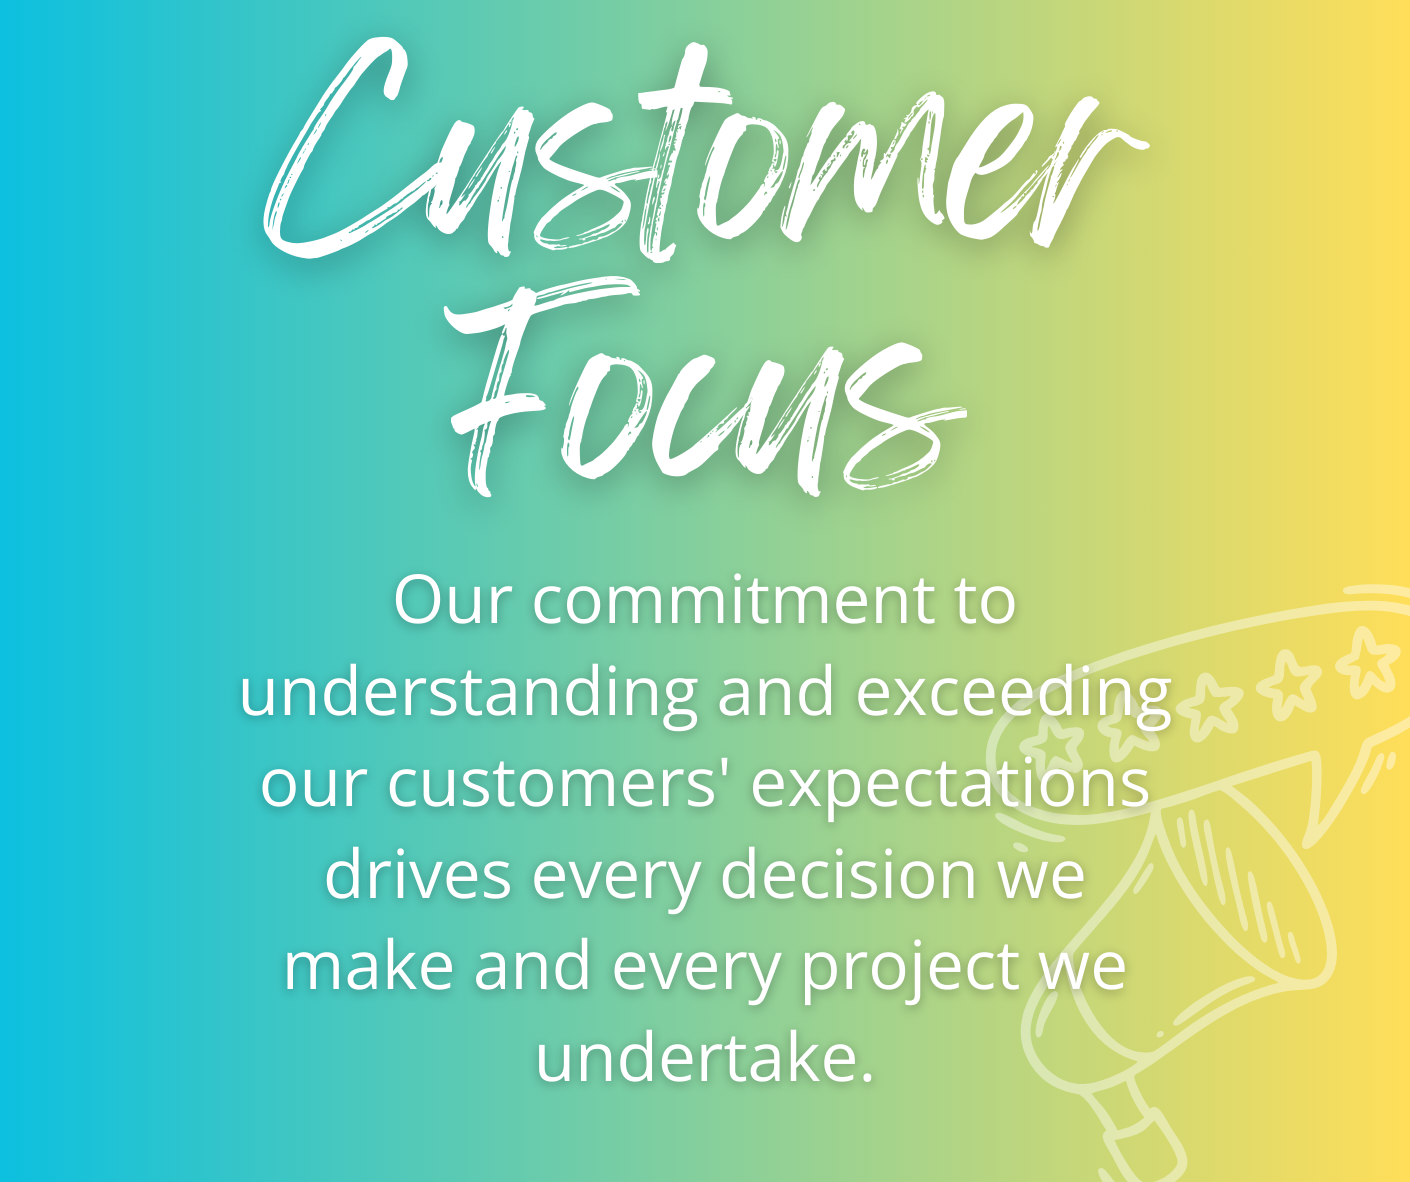 Customer Focus Graphic - Thomson Partnership has a strong commitment to understanding and exceeding the expectations of customers.